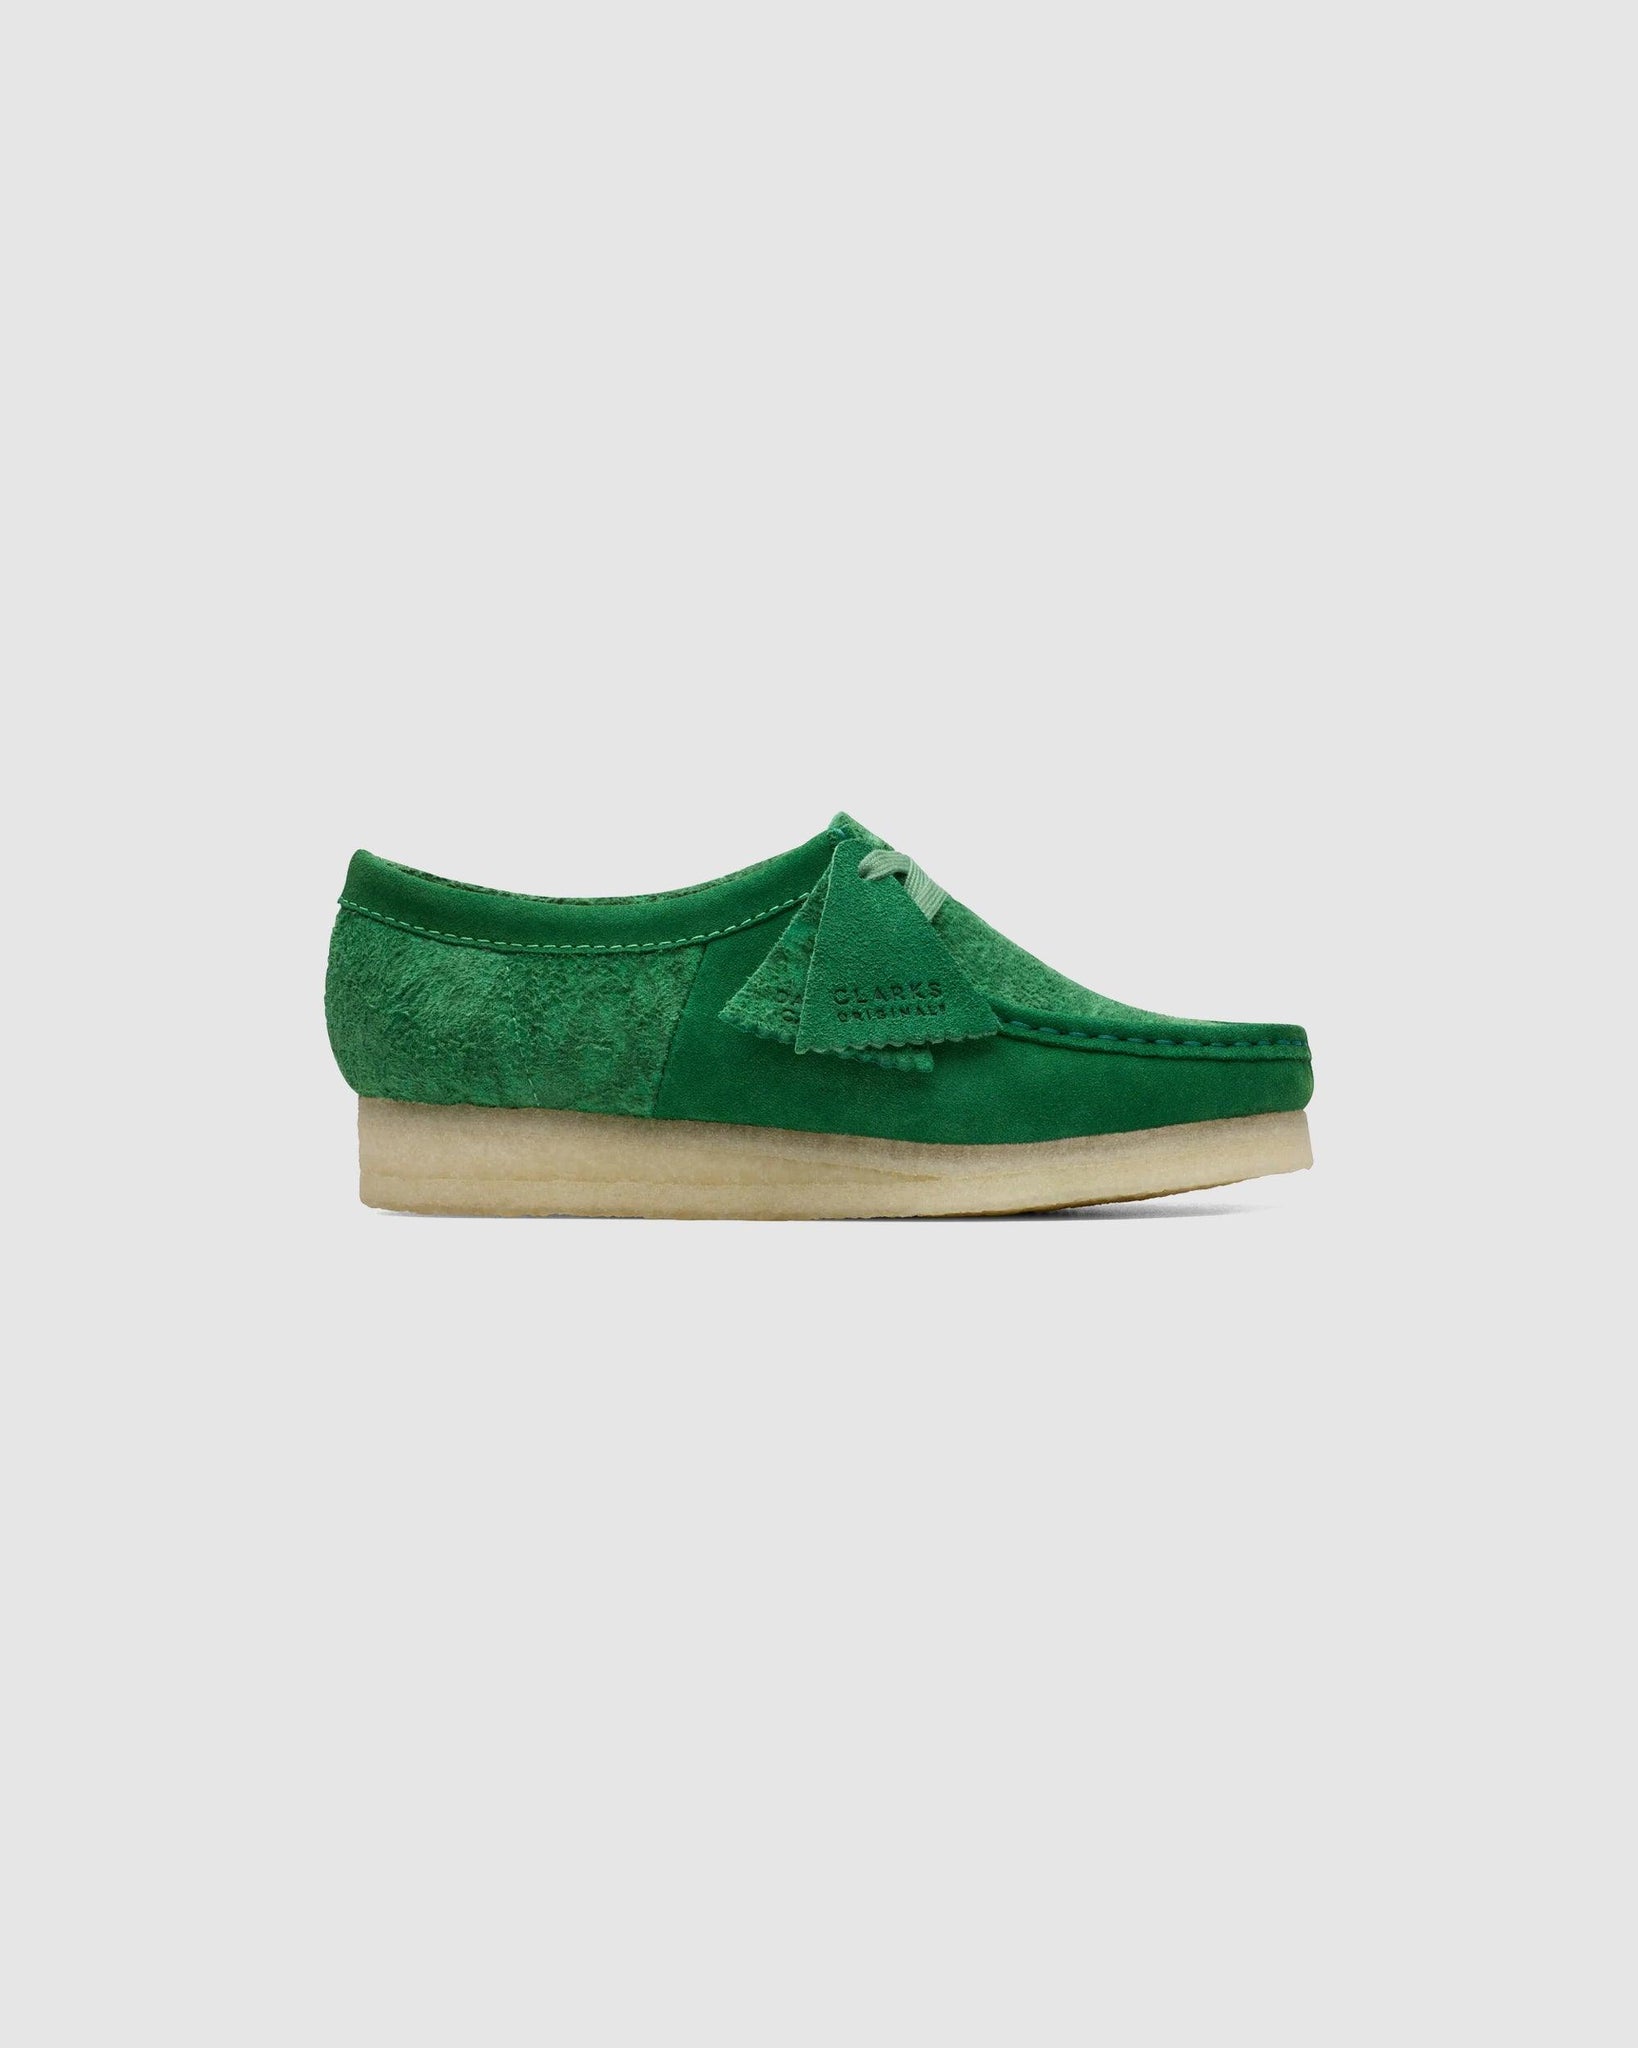 x Clarks Originals Wallabee Forrest Green - {{ collection.title }} - Chinatown Country Club 